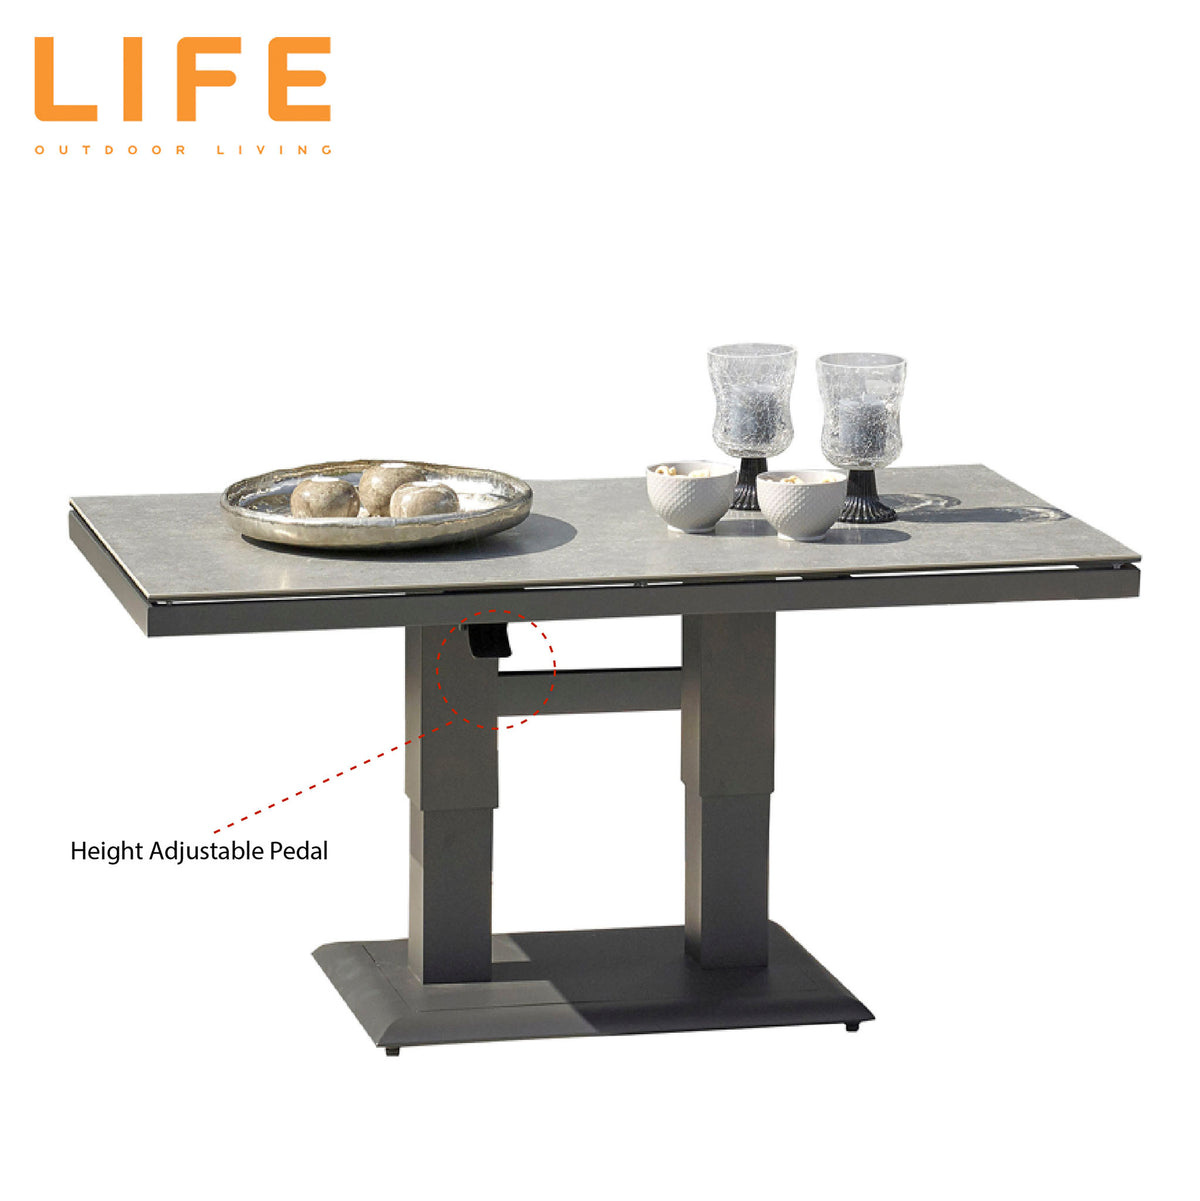 LIFE Timber Corner Set with Height Adjustable Table